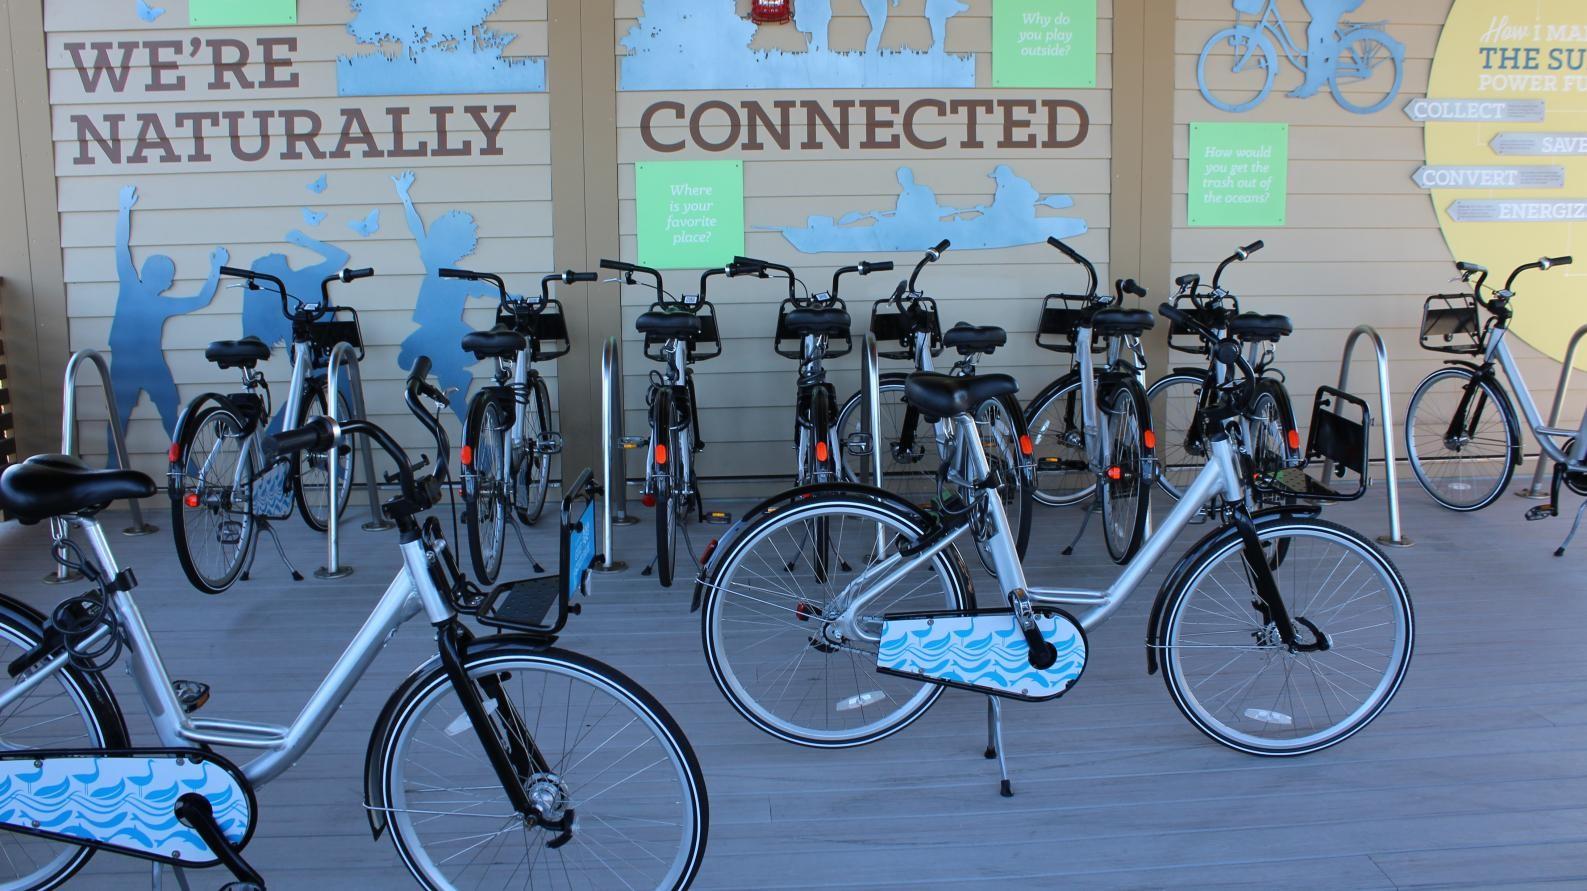 Bike Share Program Featured Throughout the Park